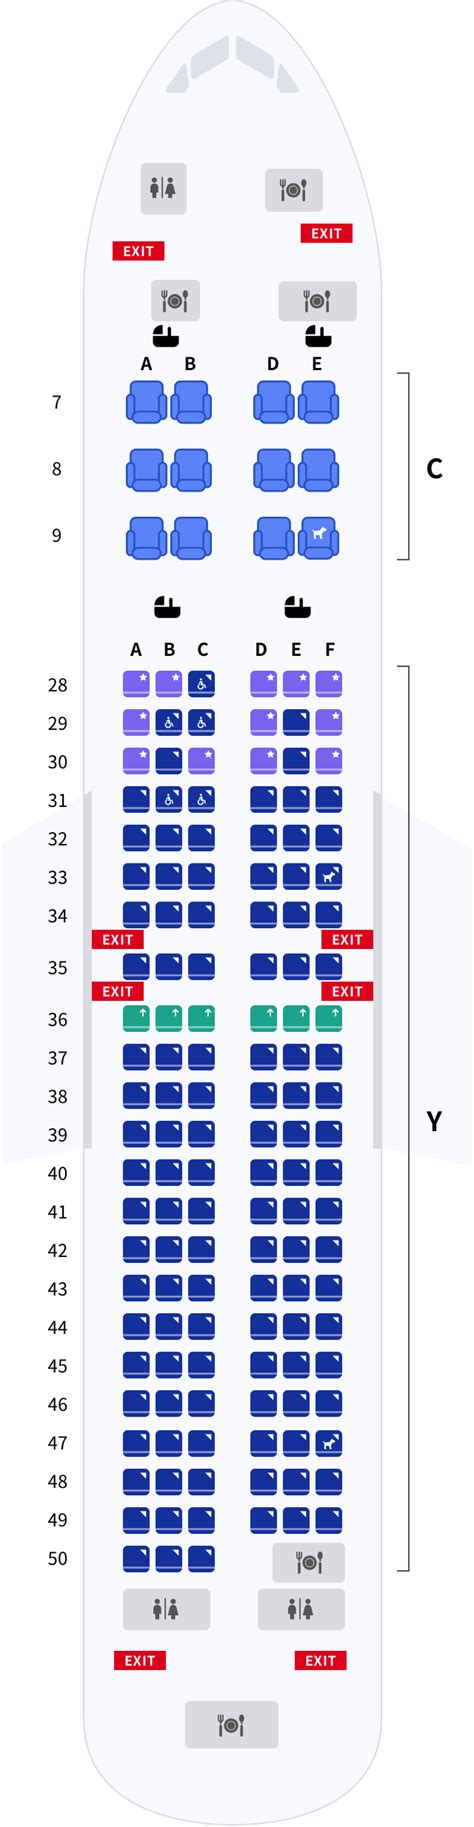 boeing   seating plan singapore airlines elcho table